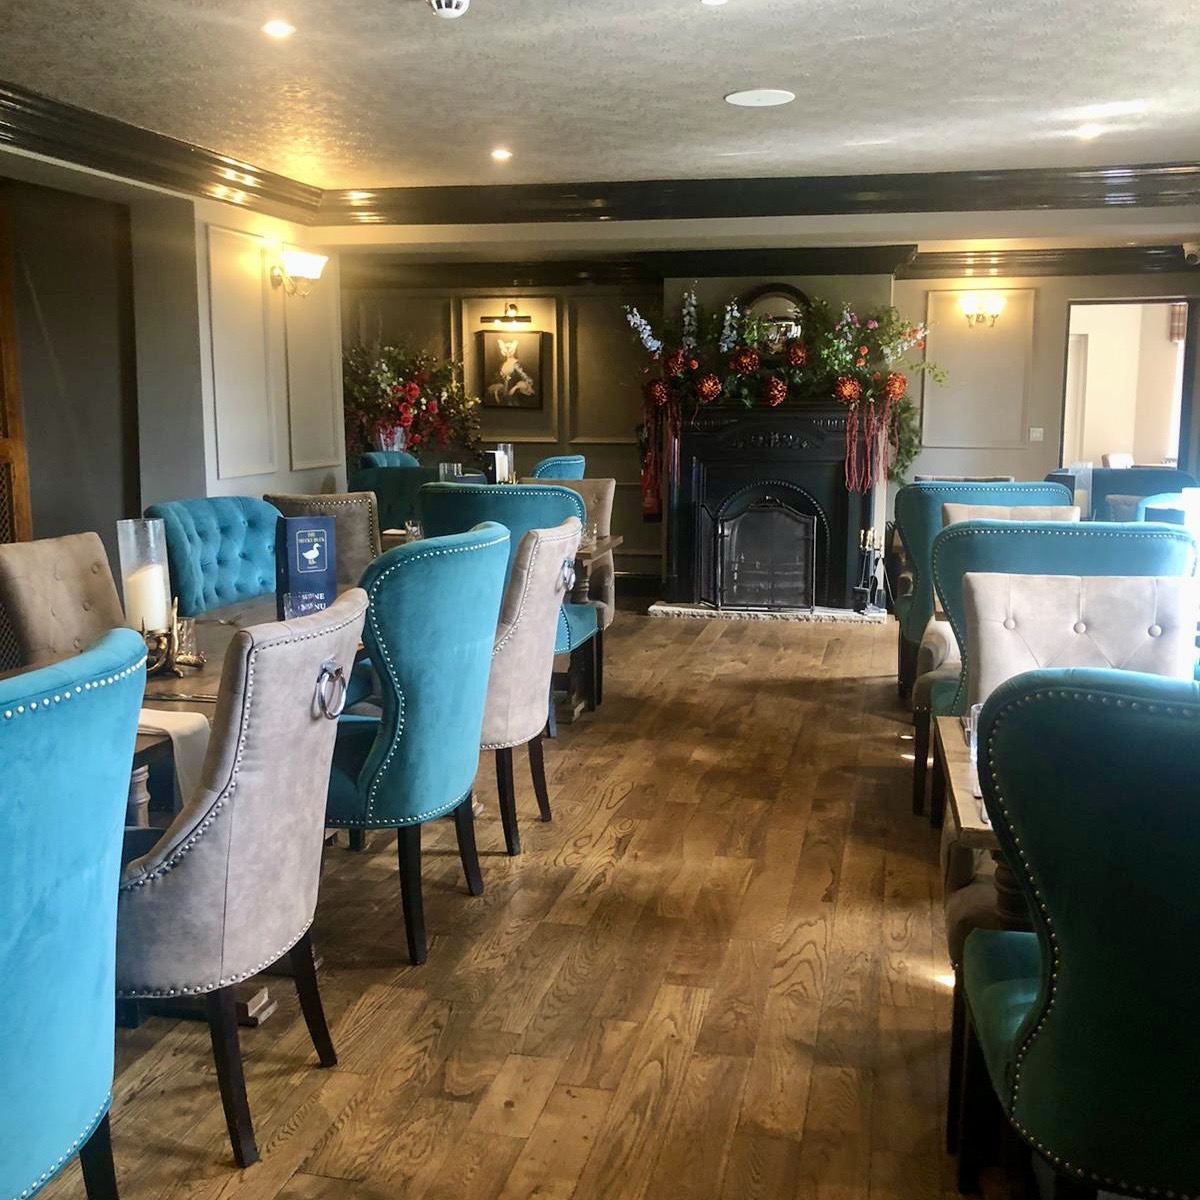 “A fantastic visit to the Mucky Duck near #Doncaster. Flavoursome, hearty cuisine in their tastefully decorated restaurant which has recently been refurbished. 2 #AARosettes awarded!” - AA Inspector Learn more about our #AARosette scheme > tinyurl.com/4udrtp49